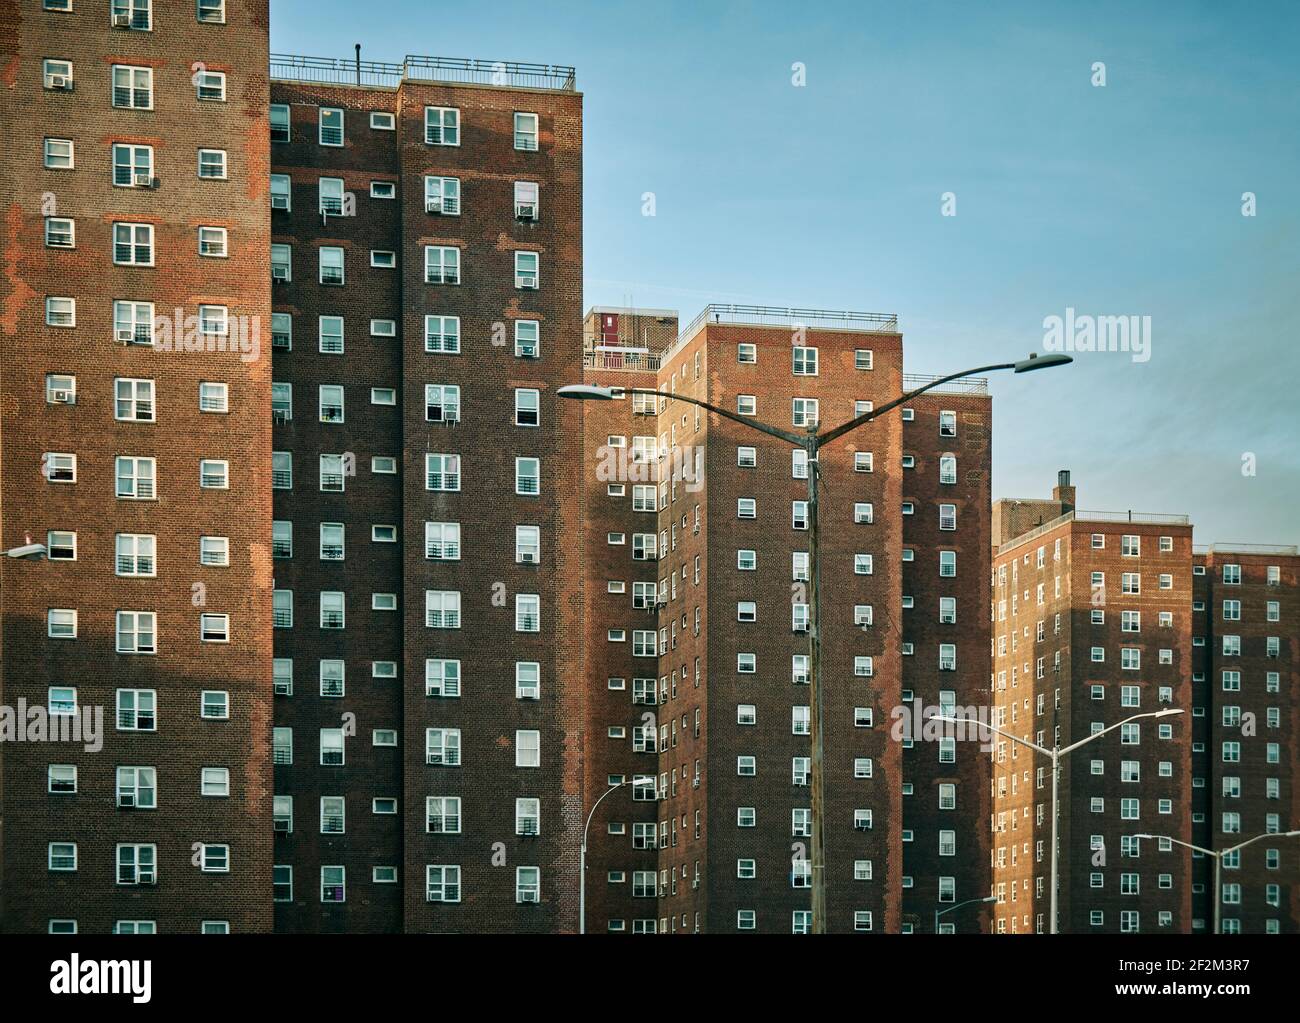 Brickwall Builidngs and Skyscraper in New York City, USA, Untited States of America, Stock Photo